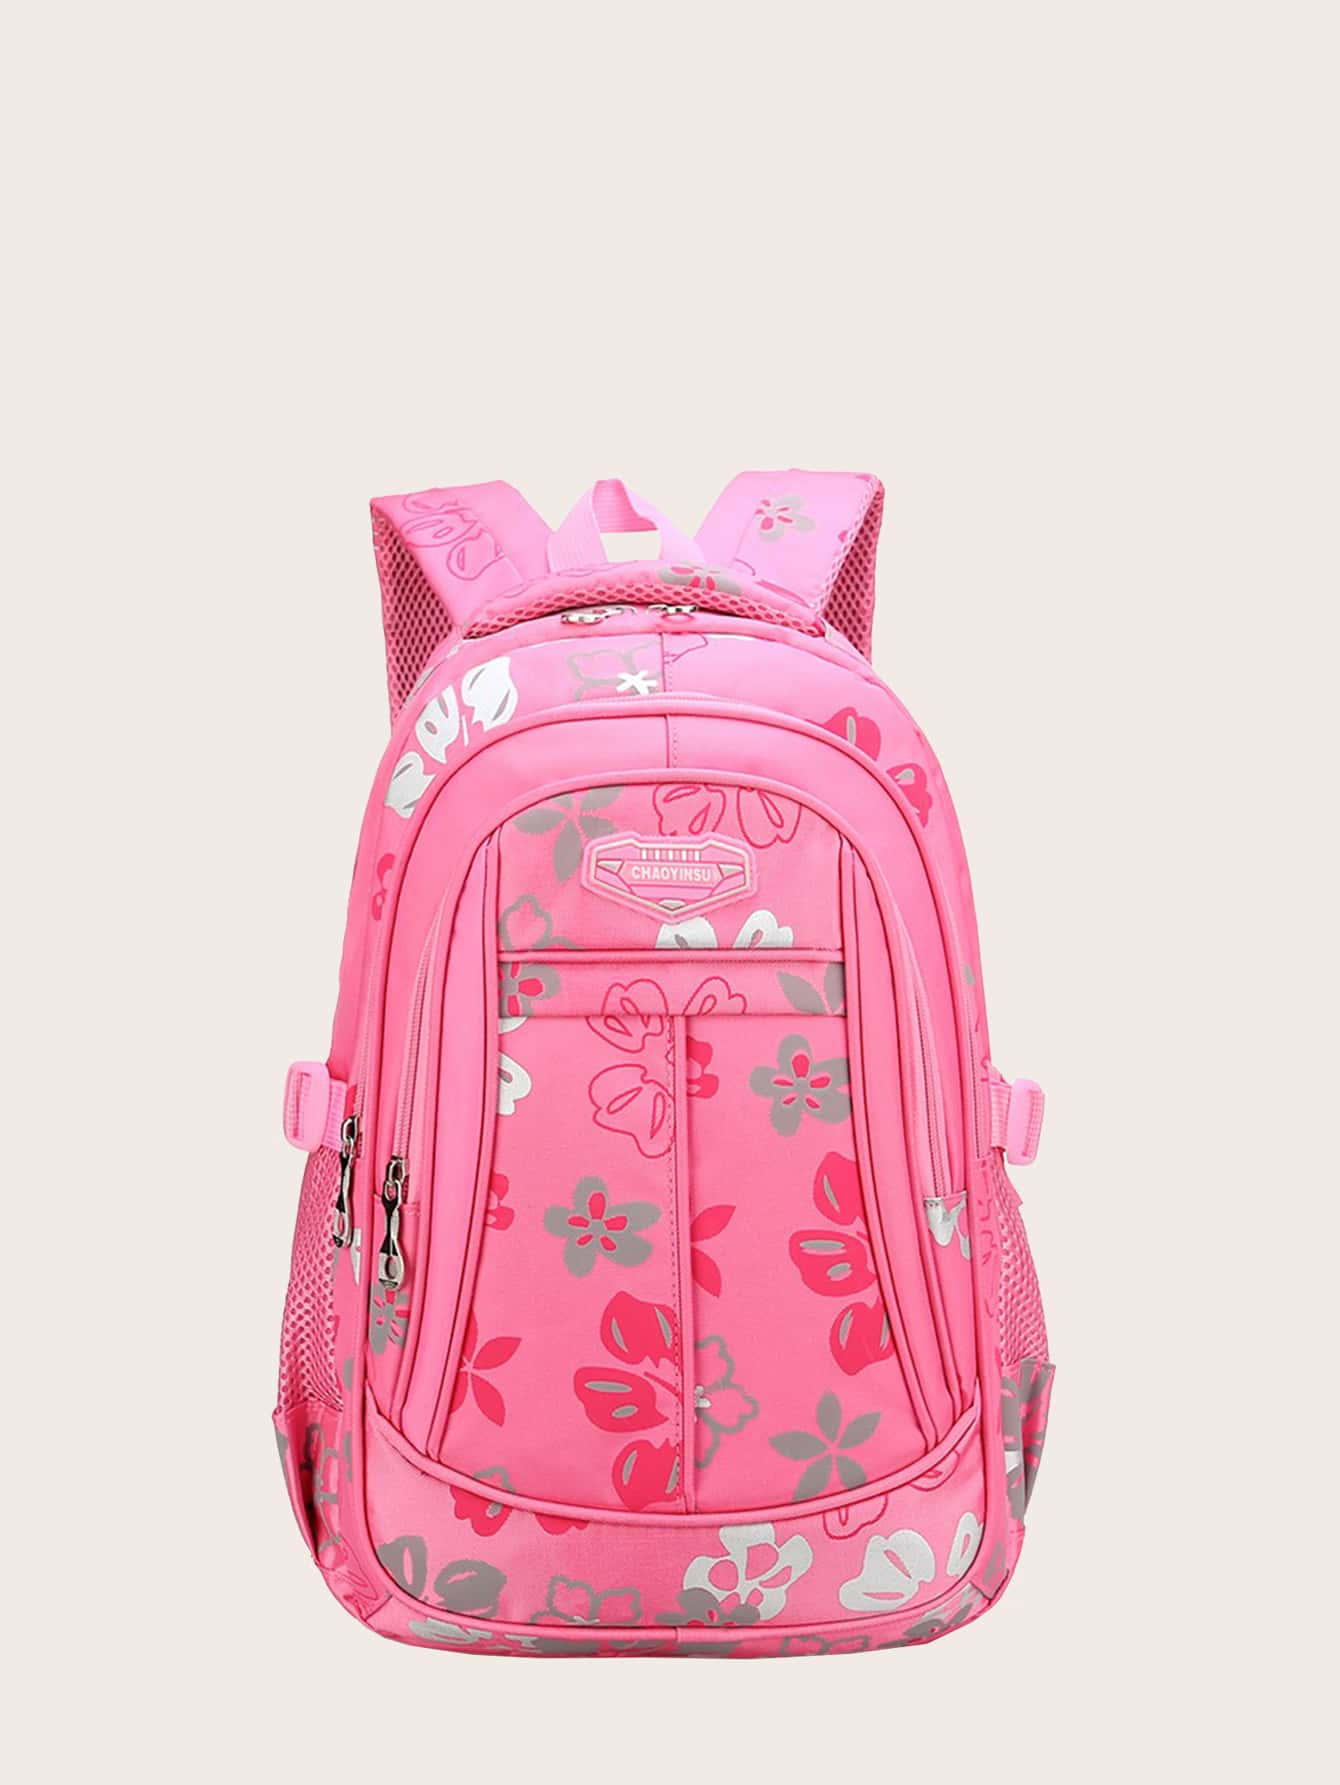 Floral Graphic Backpack